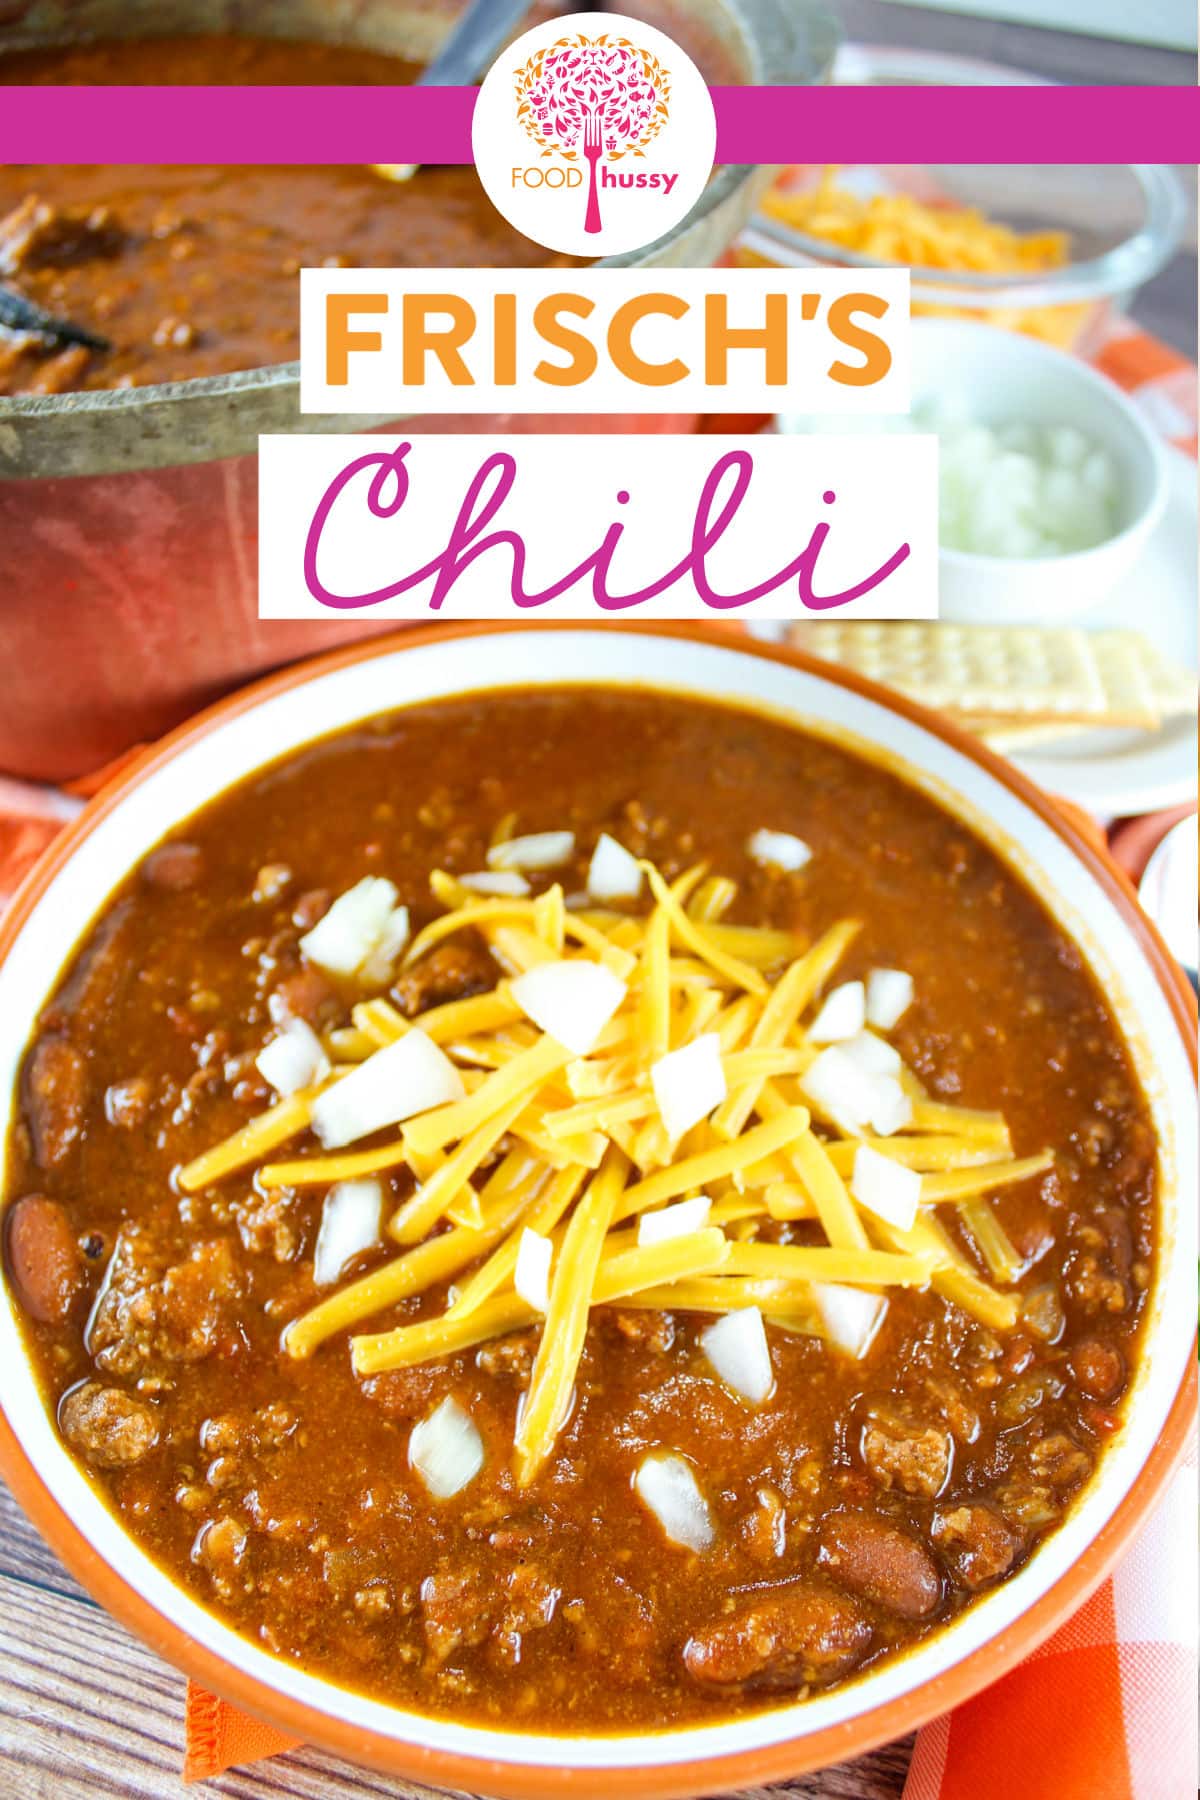 Frisch's Chili recipe is going to be a family favorite! Loaded with beefy flavor - you'll enjoy bowl after bowl - topped with cheese and diced onion. Make this Ohio specialty wherever you are!  via @foodhussy